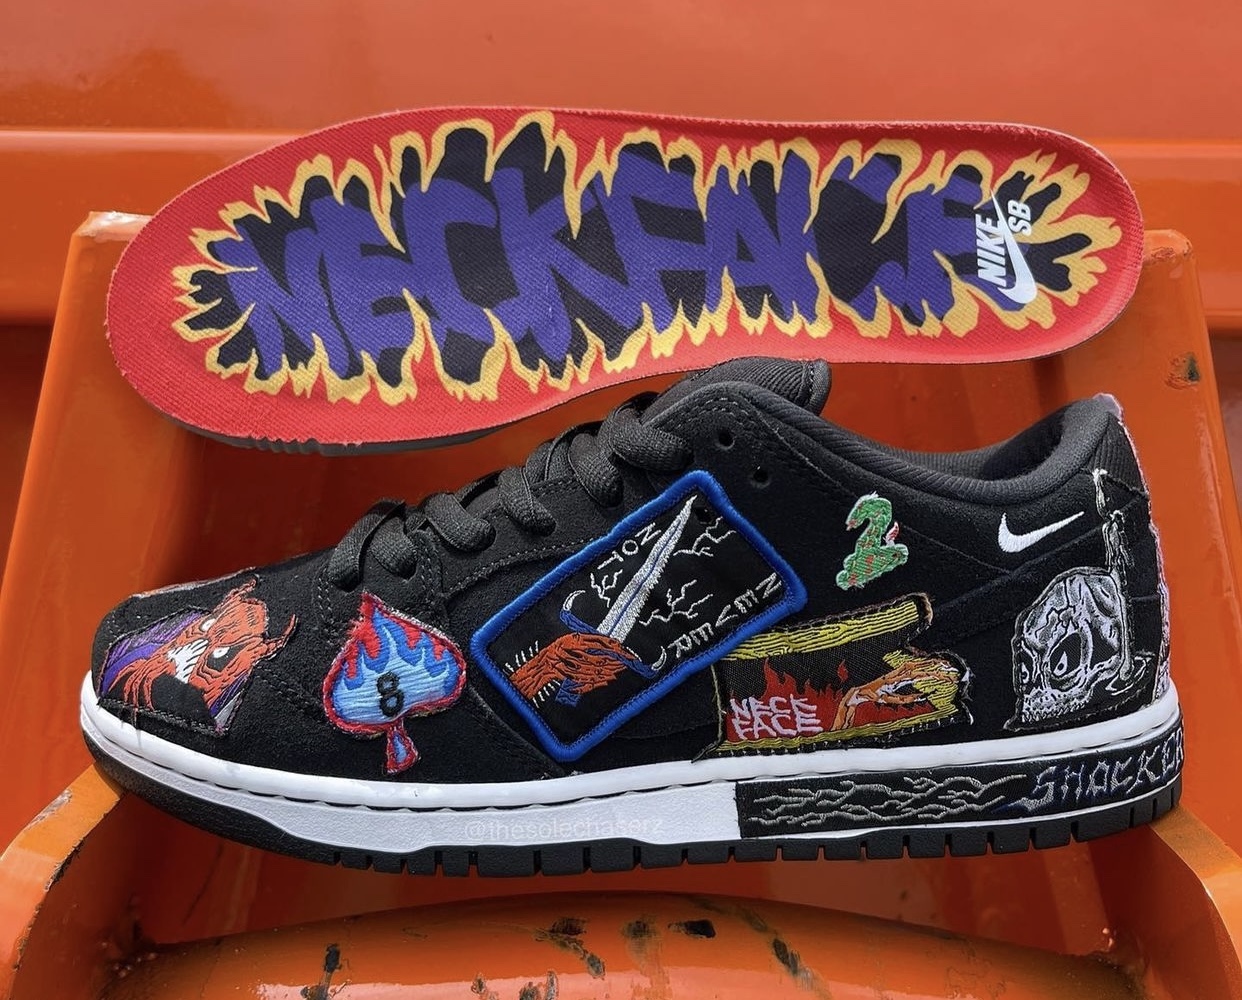 Neckface x Nike SB Dunk Low DQ4488-001 Release Date | SBD